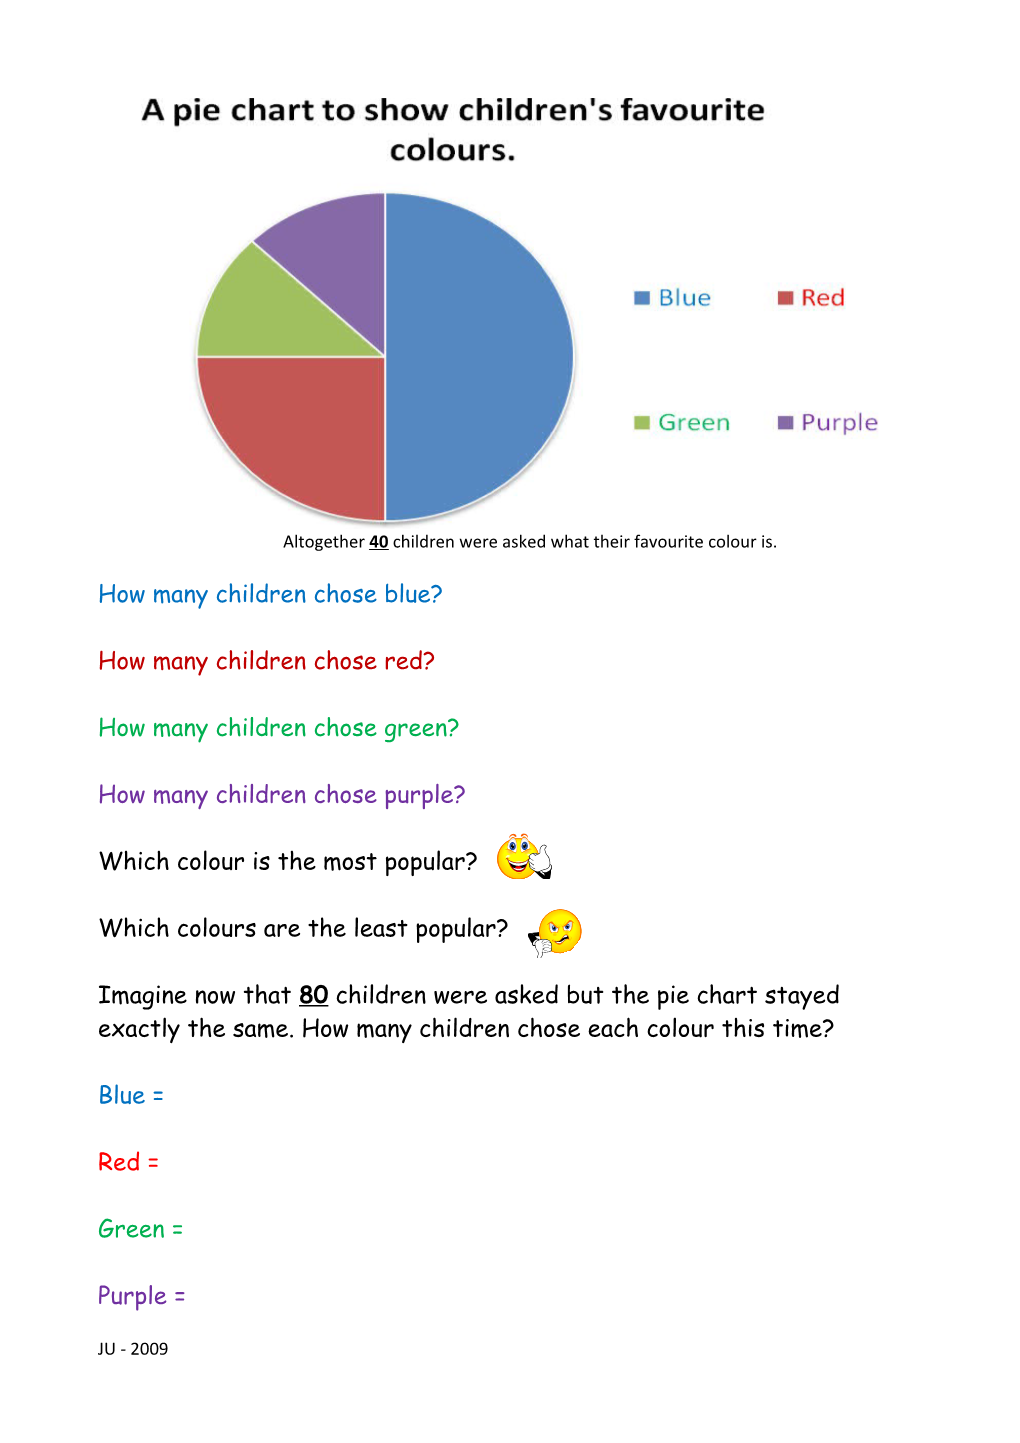 Altogether 40 Children Were Asked What Their Favourite Colour Is